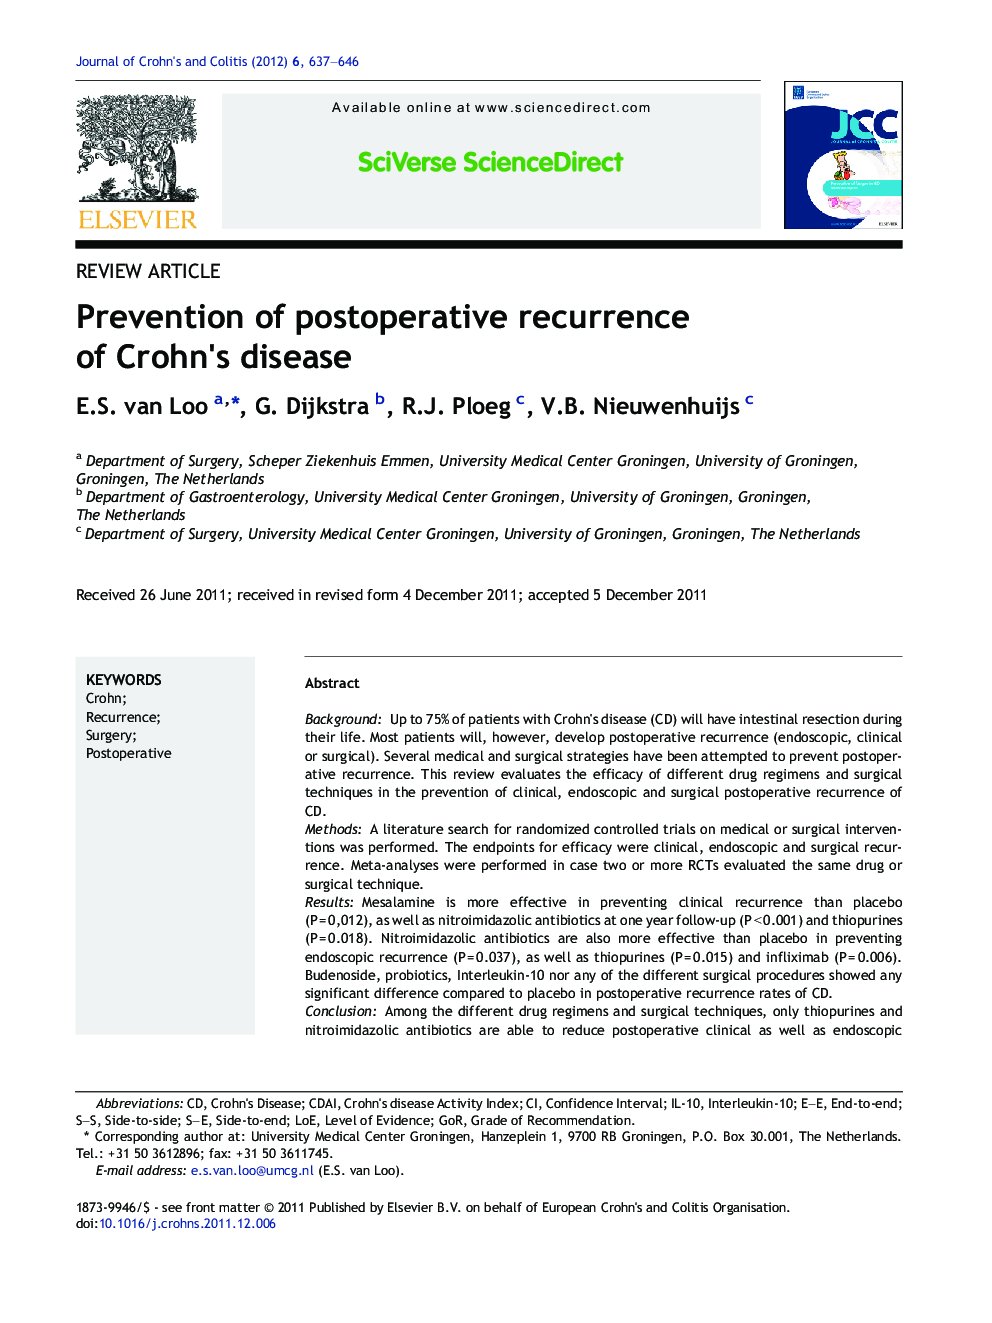 REVIEW ARTICLEPrevention of postoperative recurrence of Crohn's disease